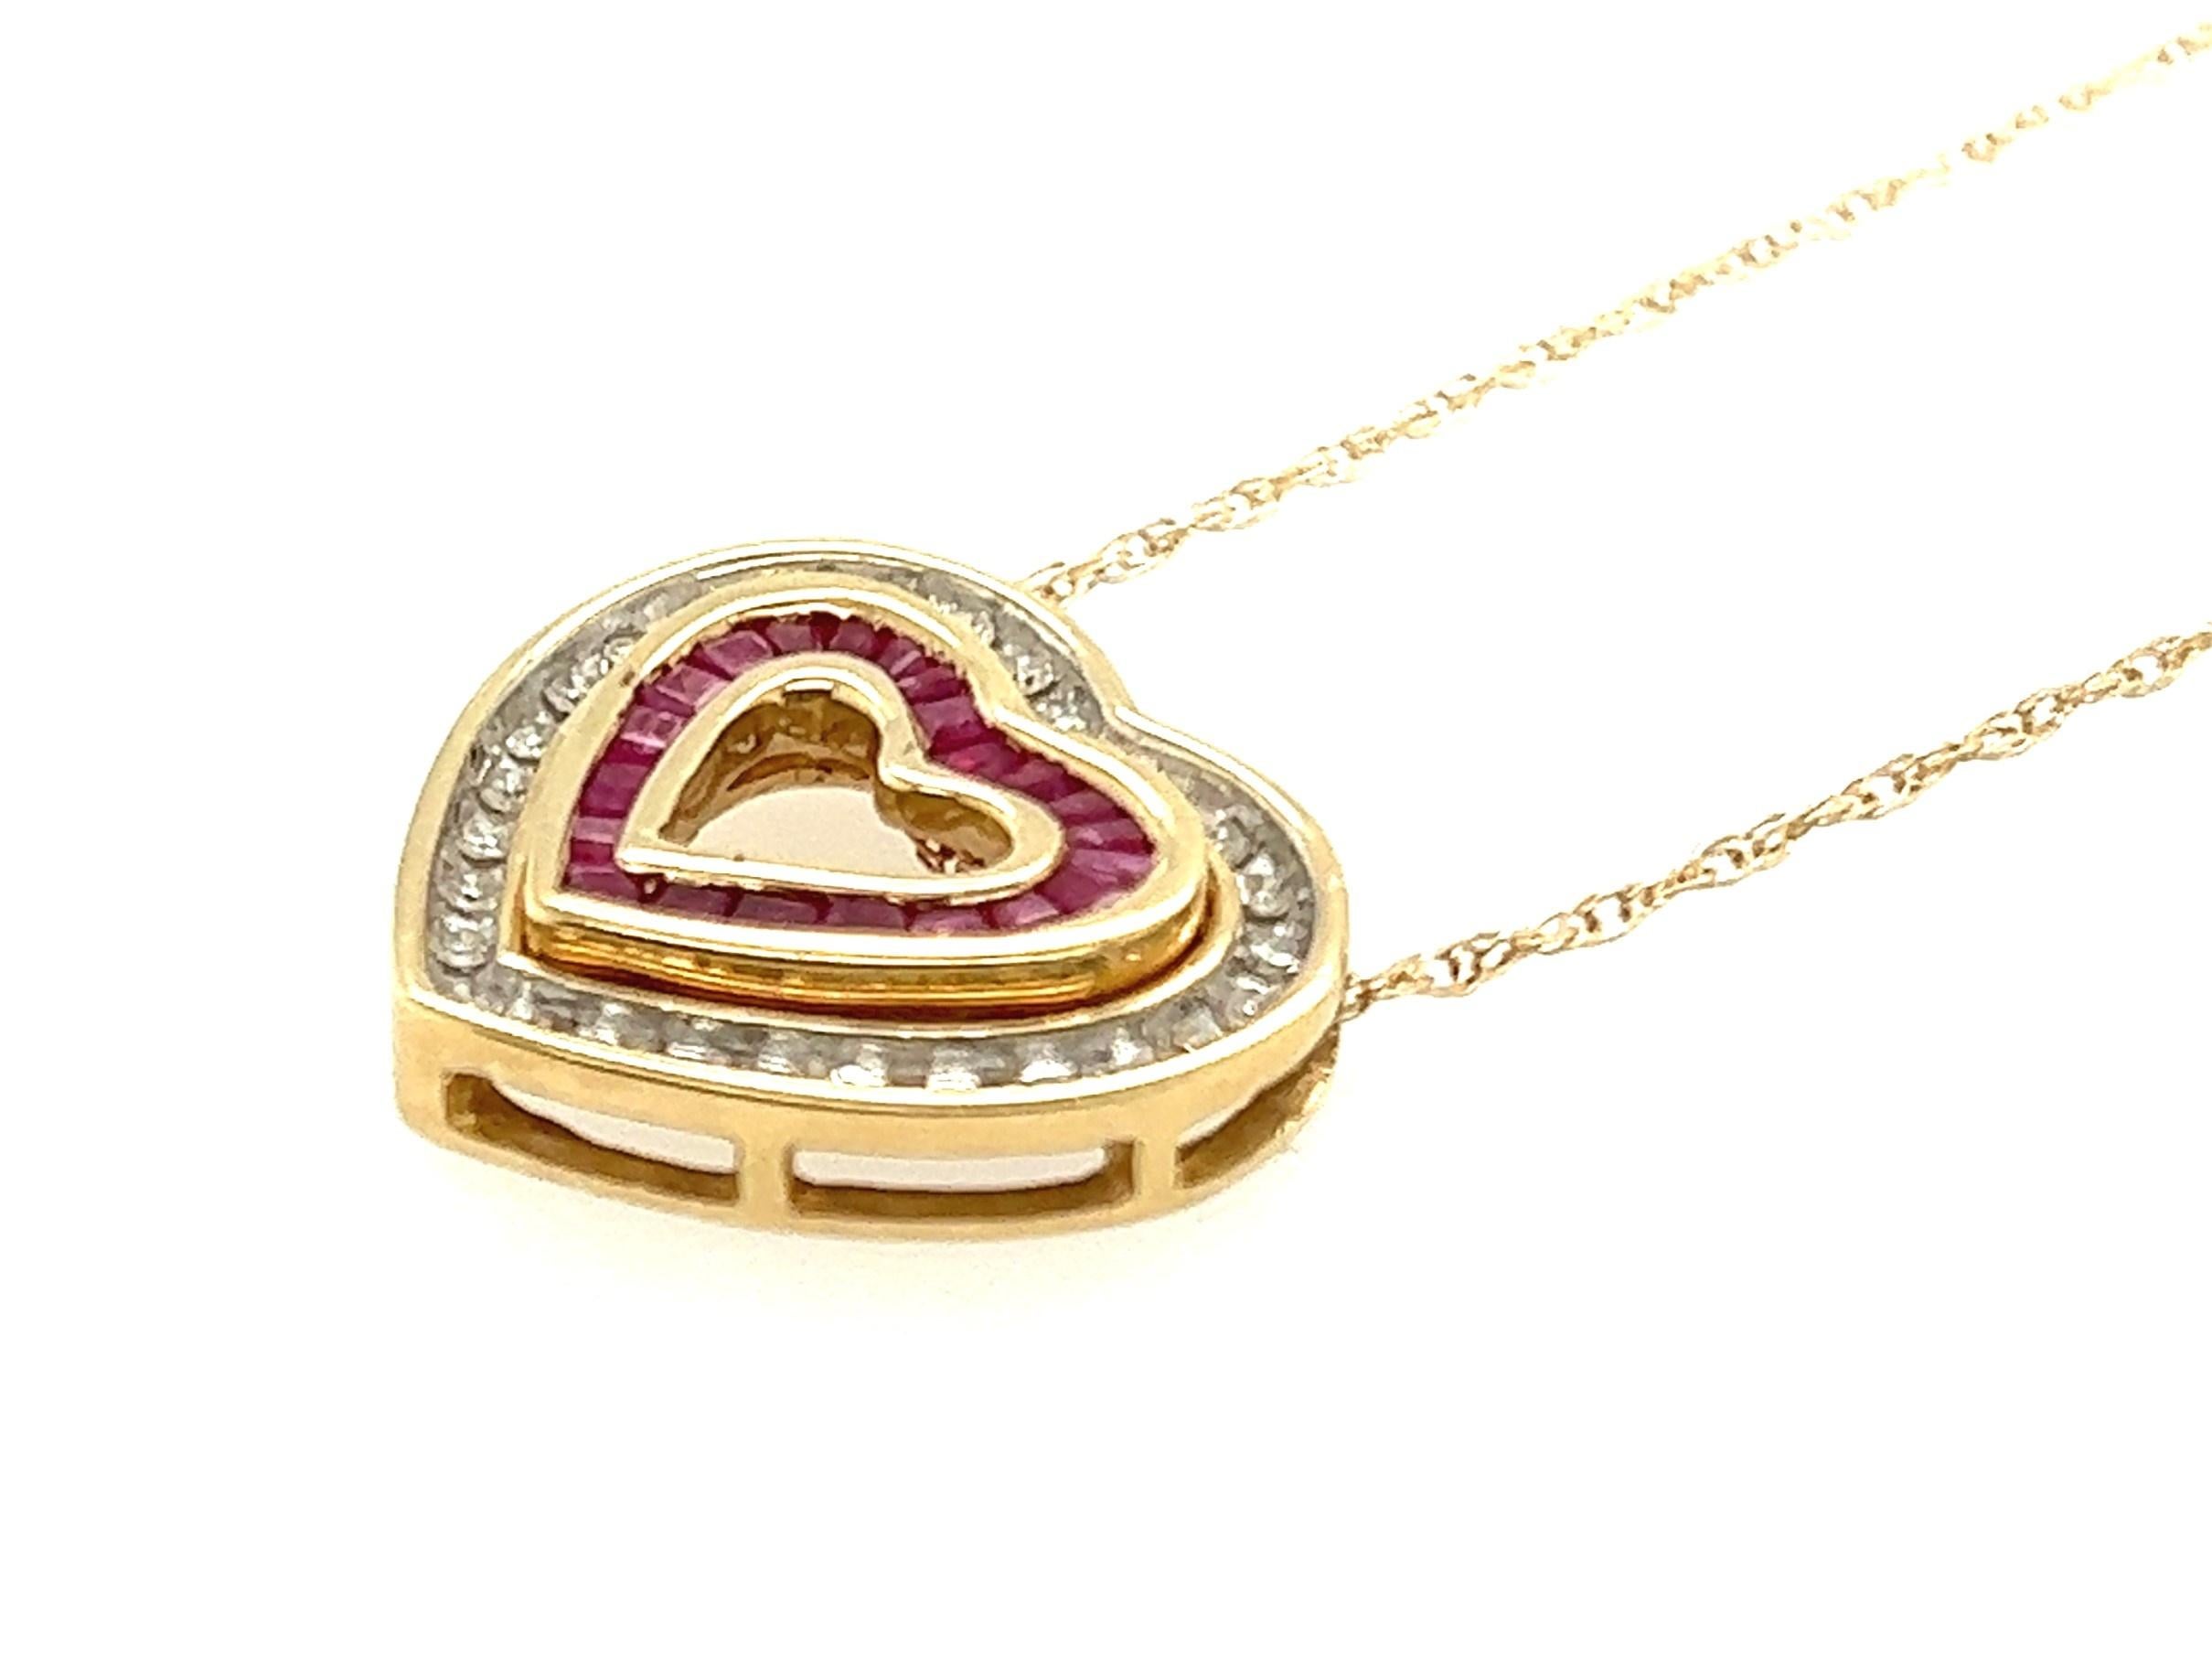 10kt yellow gold three-in-one heart pendant with 0.28tcw H-I/I1-I2 Diamonds and 0.32tcw Ruby Double Heart Necklace 18